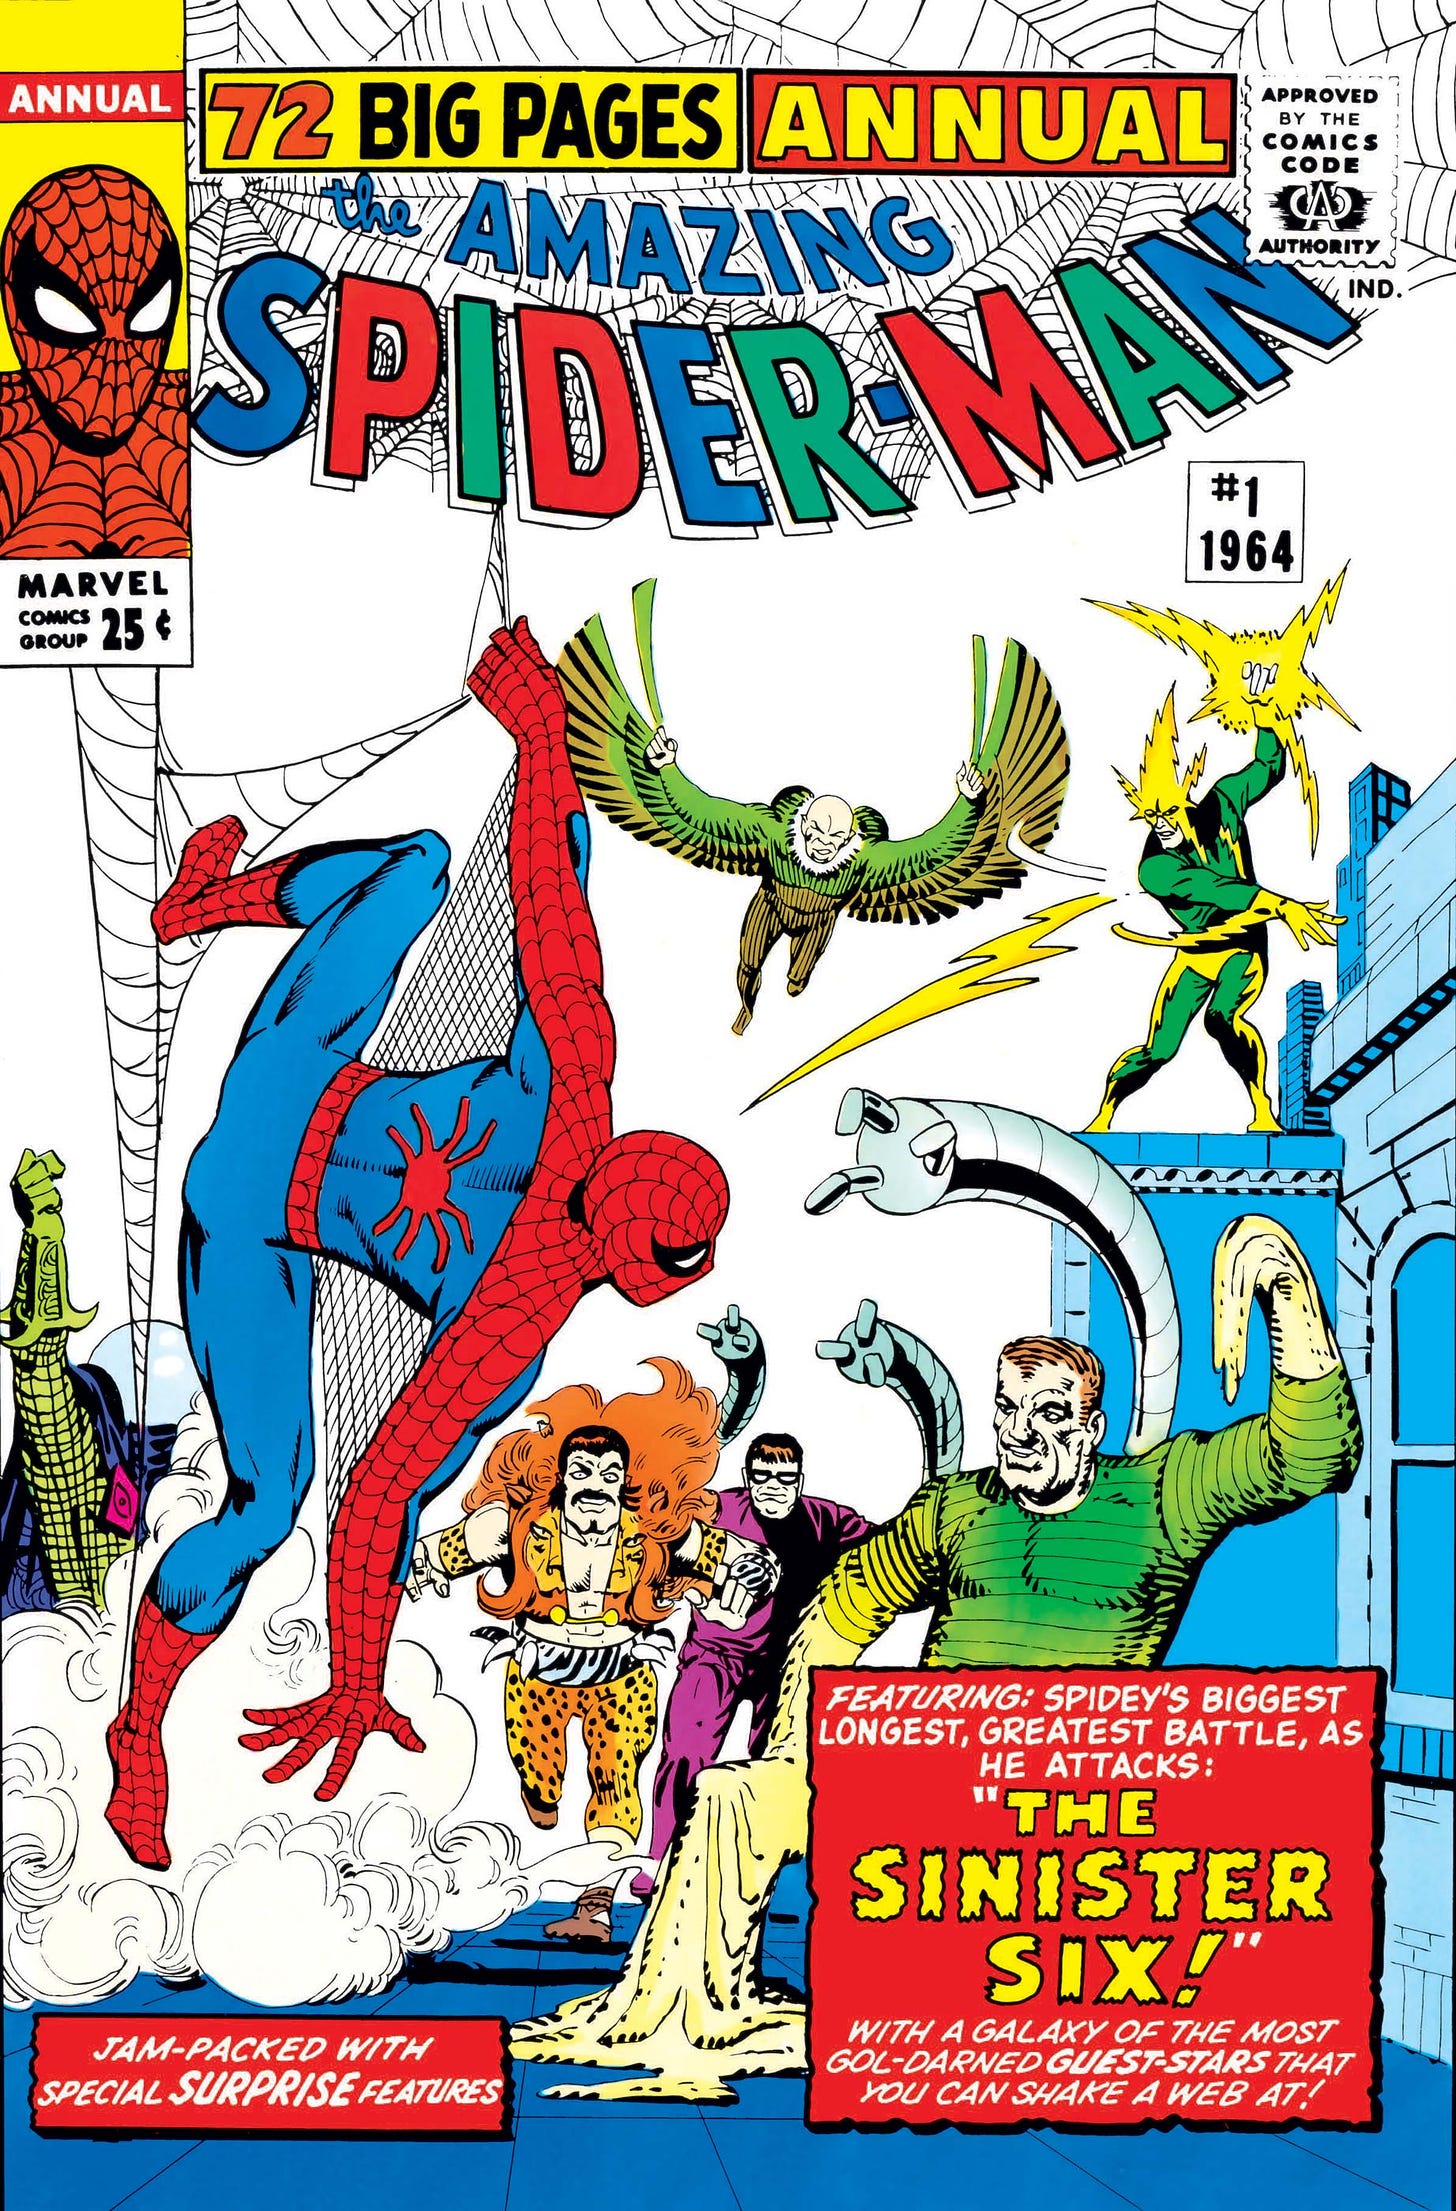 Amazing Spider-Man Annual (1964) #1 | Comic Issues | Marvel